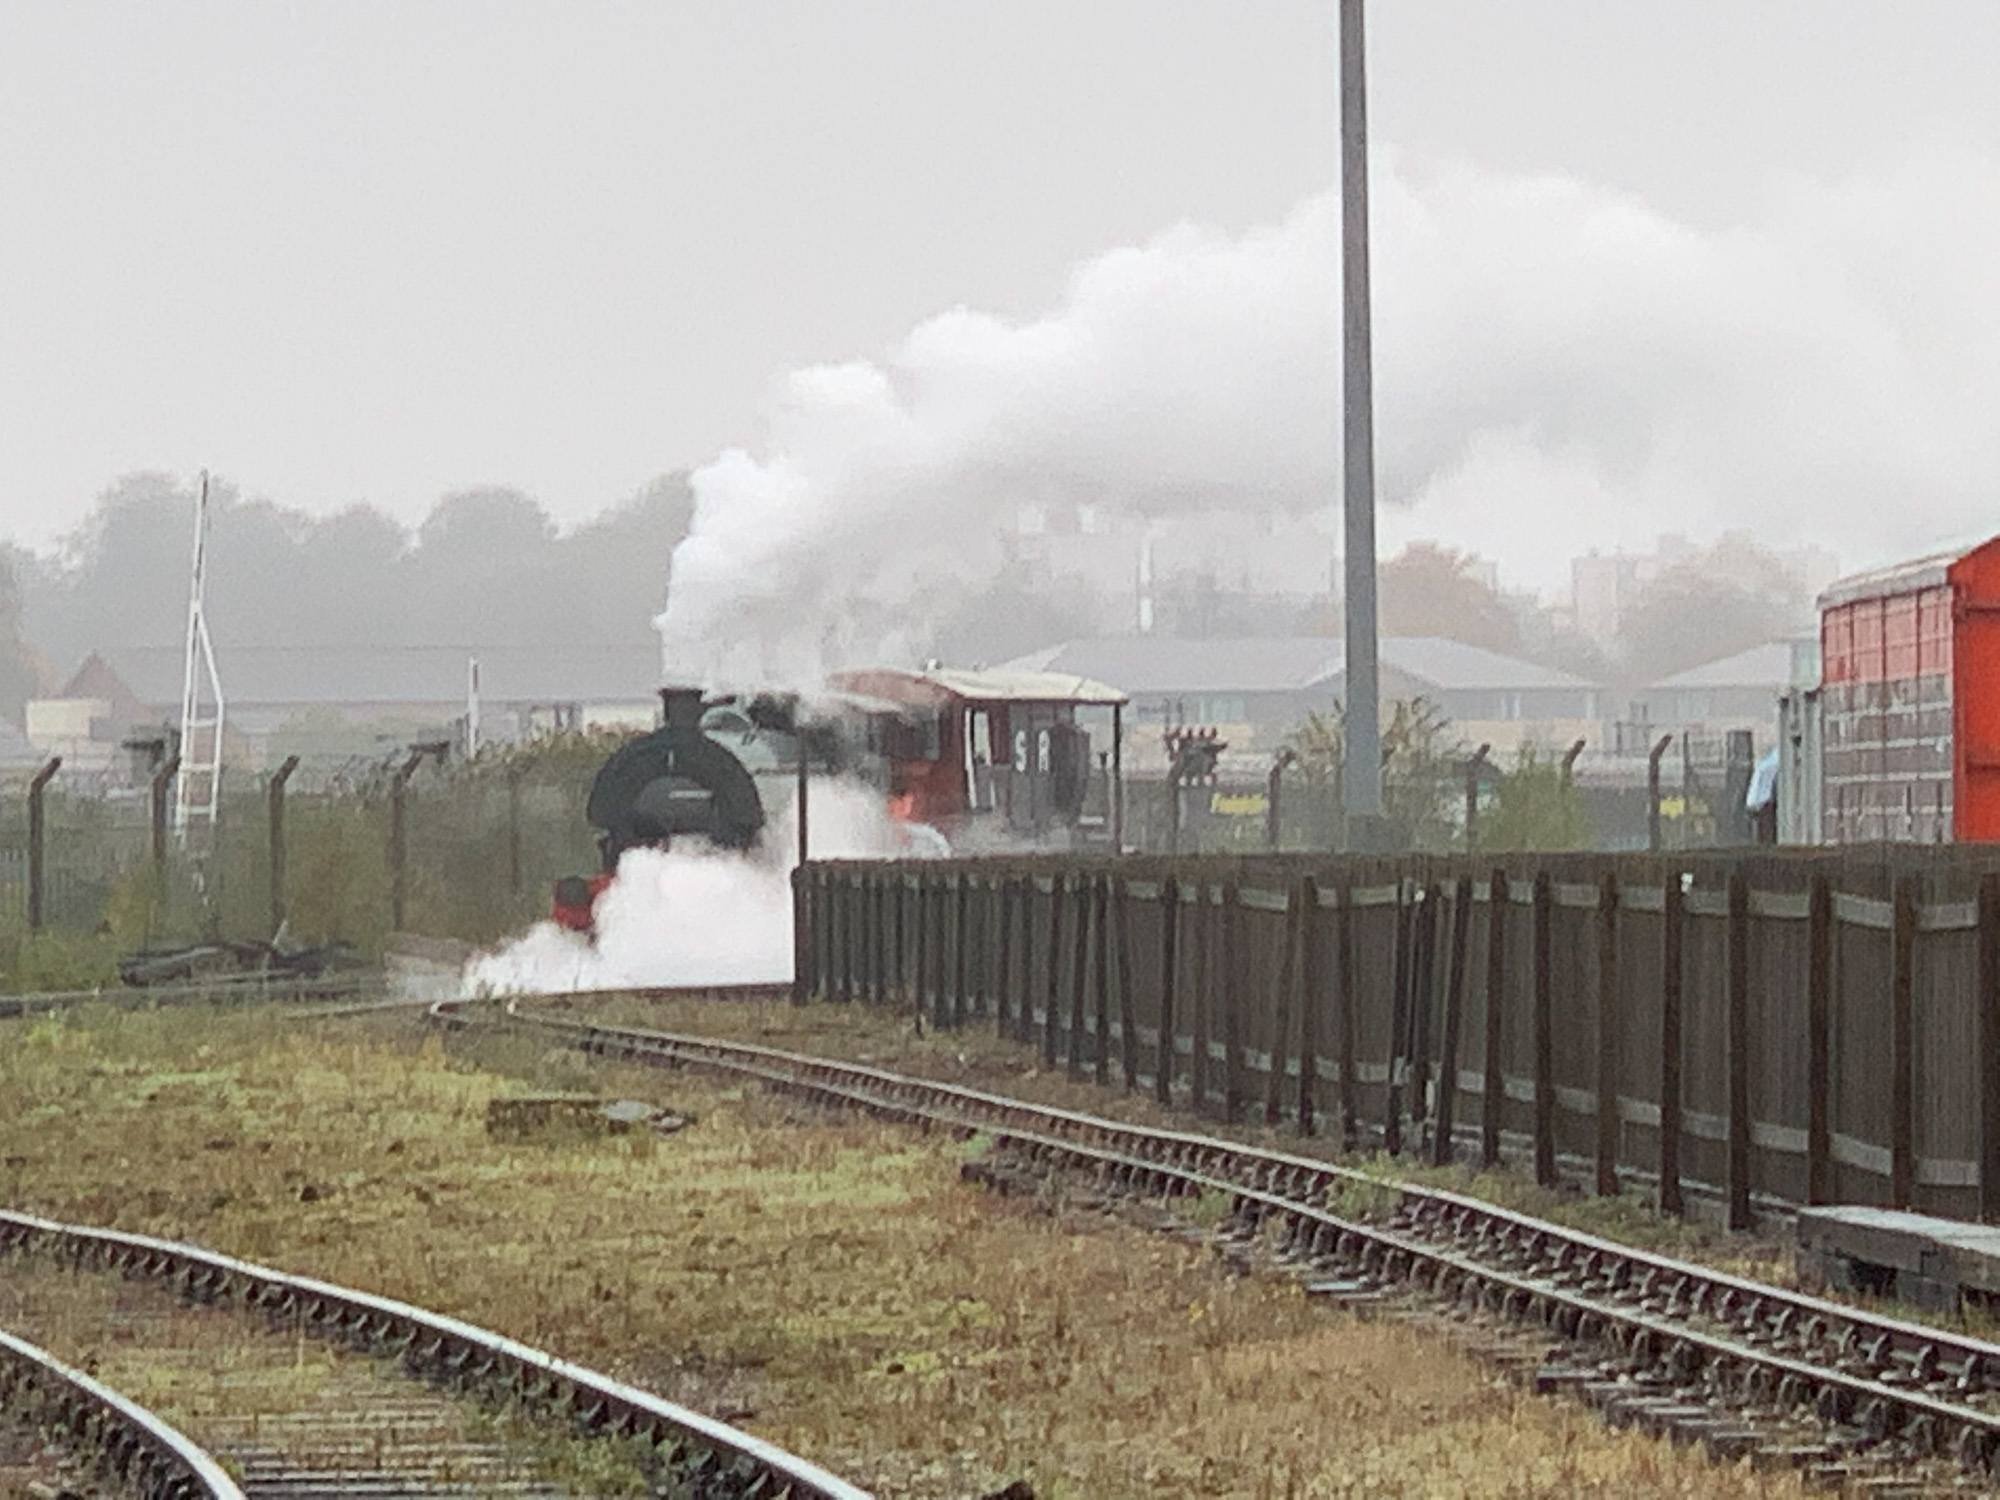 A steam train at the National Railway Museum